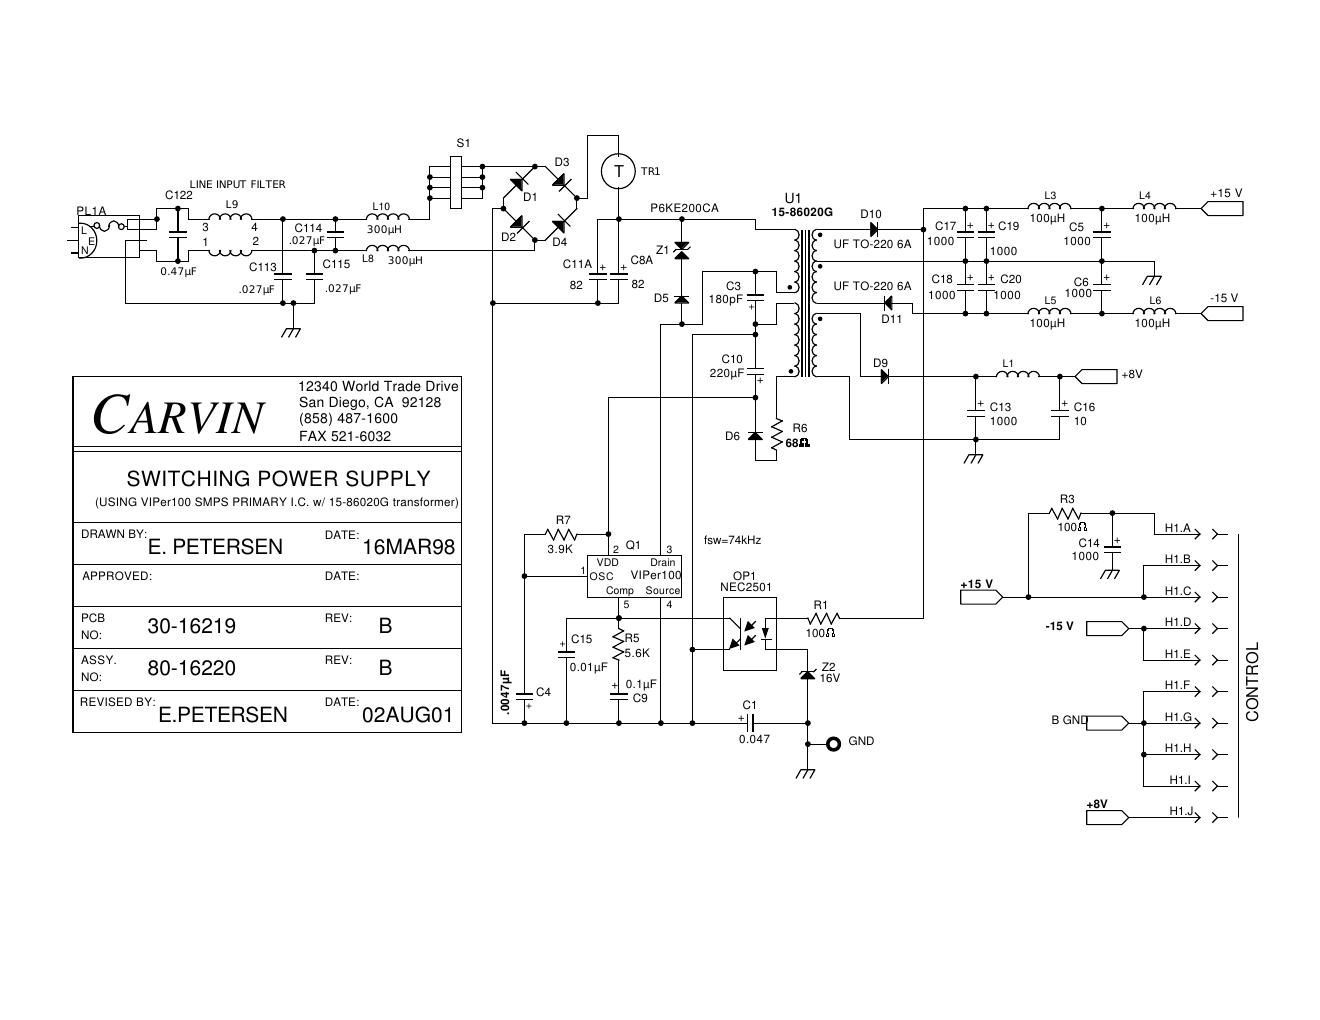 carvin switchmode power supply rev b schematic